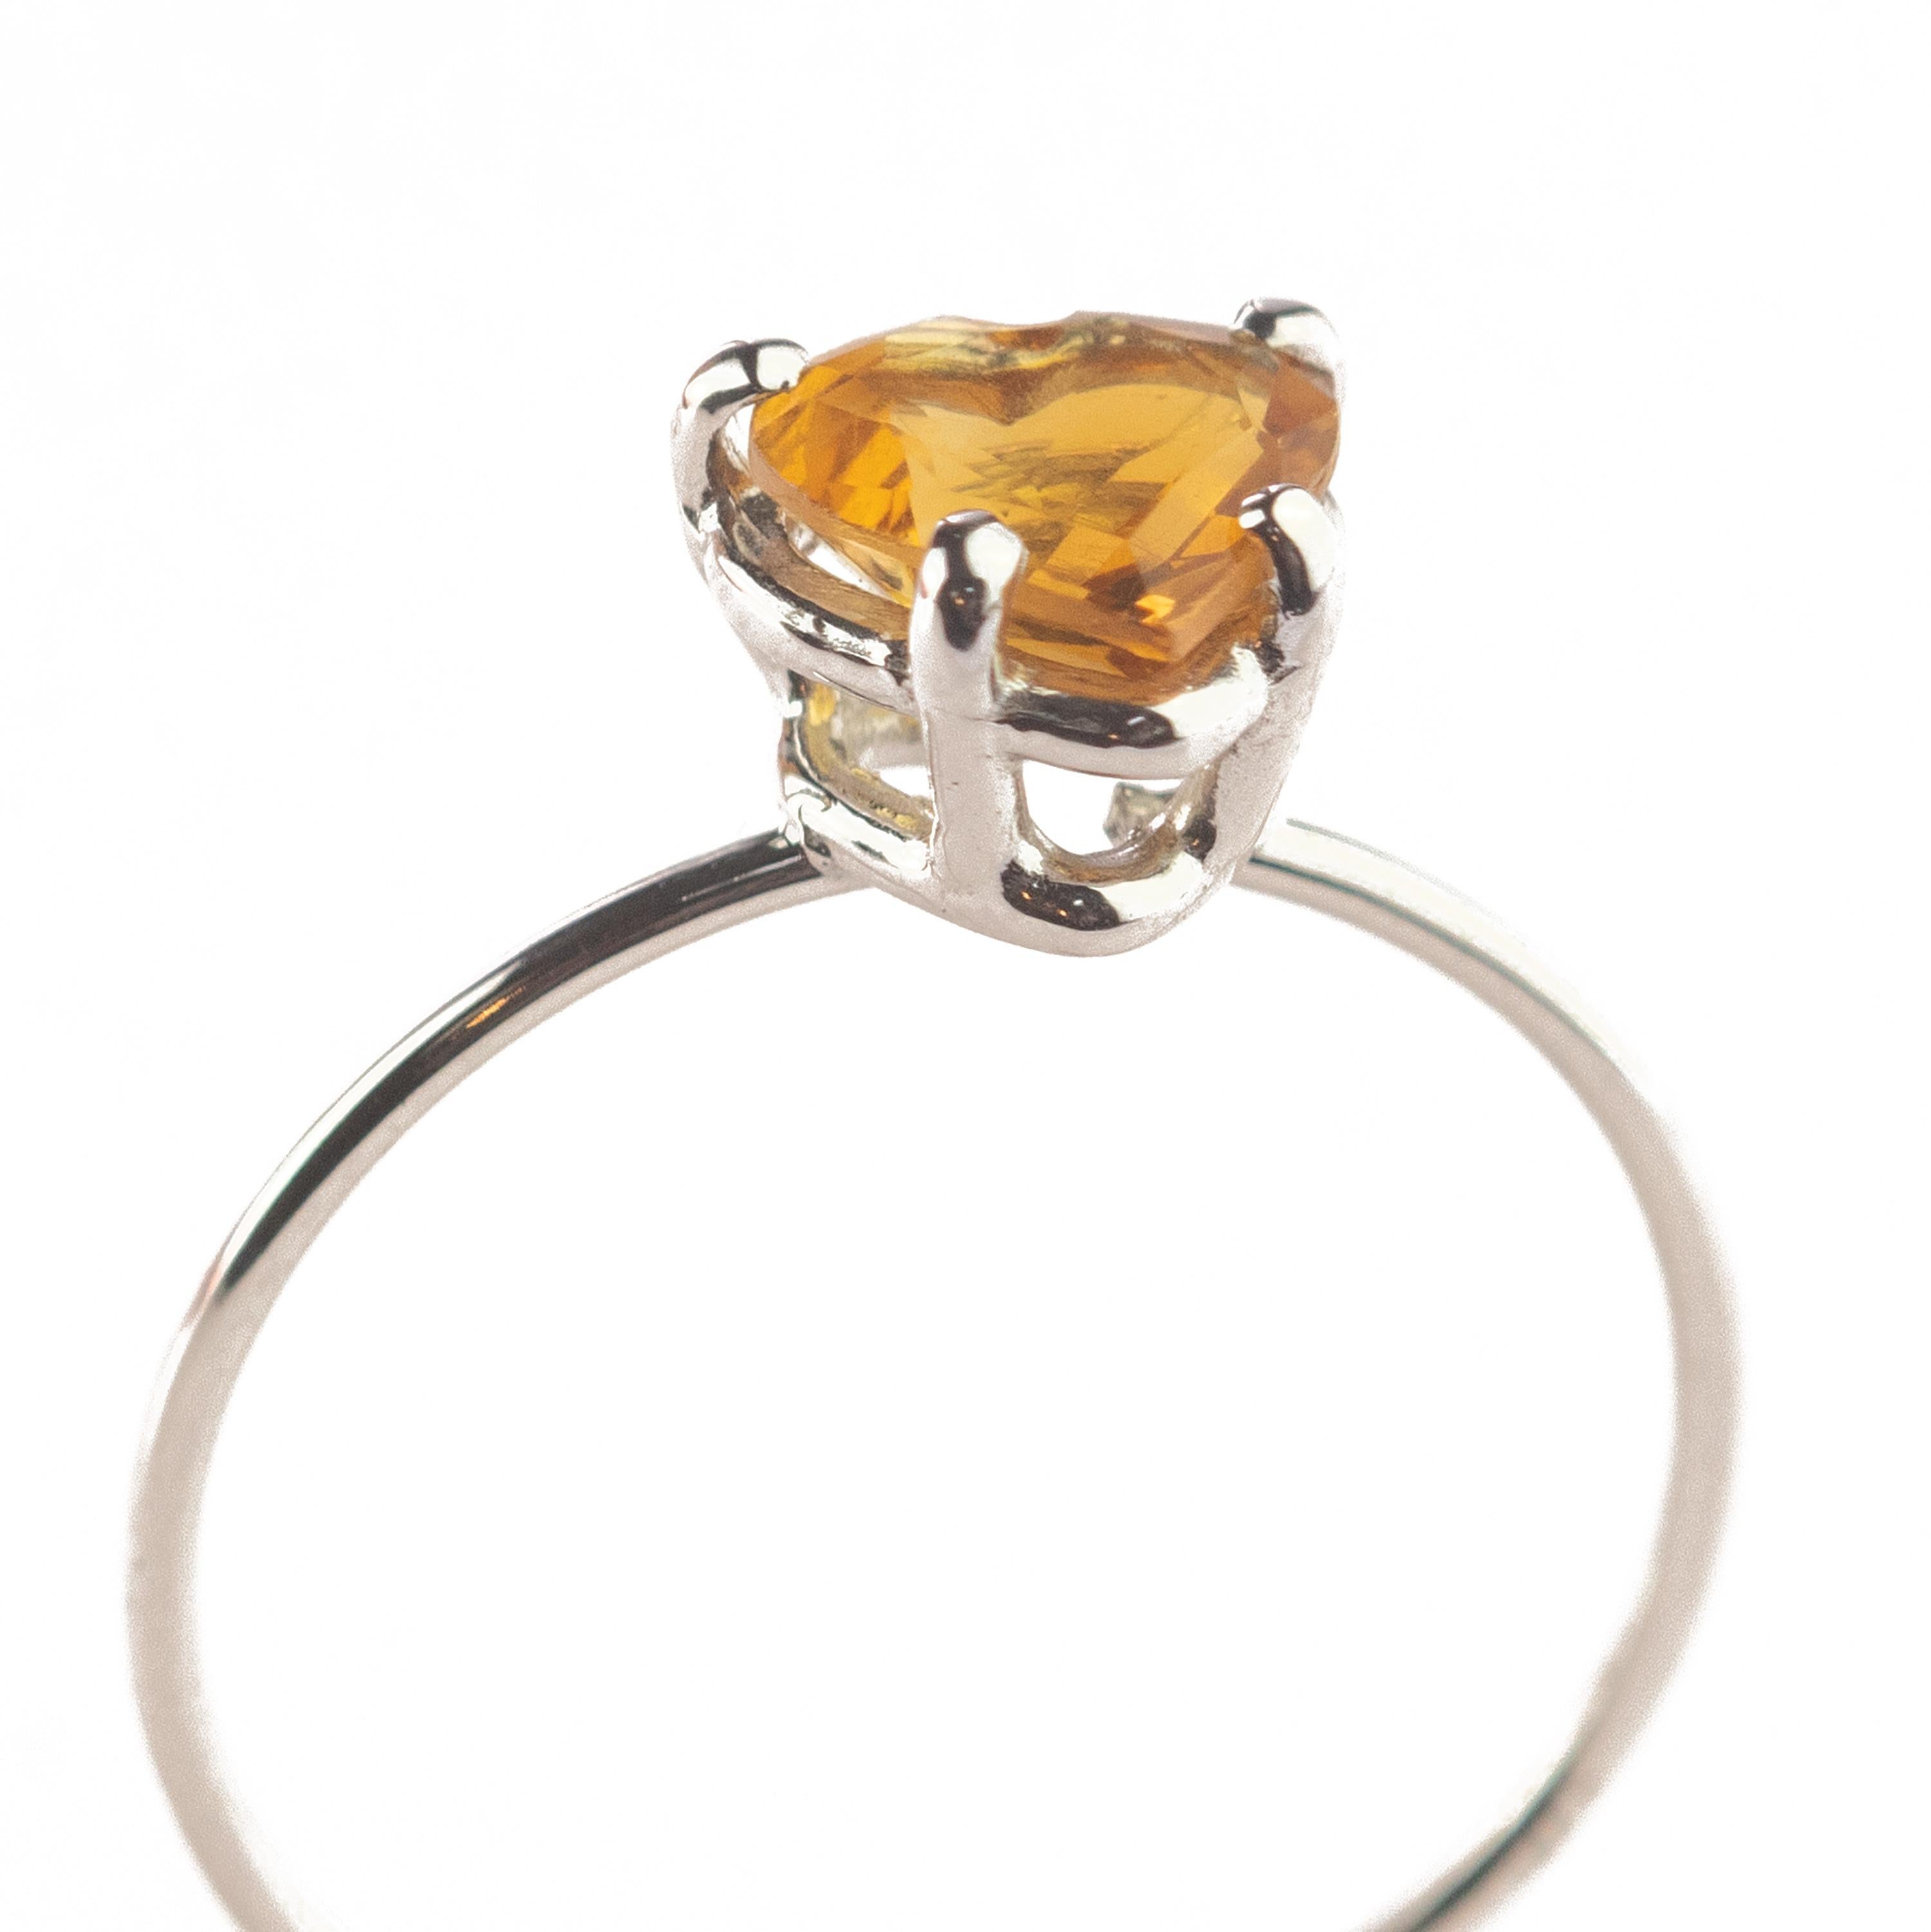 Marvelous handmade 18 karat white gold band thin ring embellished with a wonderful heart shaped citrine quartz. Open your intuition and enhance your senses to love. 

Inspired by strong feeling of love. The beating heart is used as an intensive form